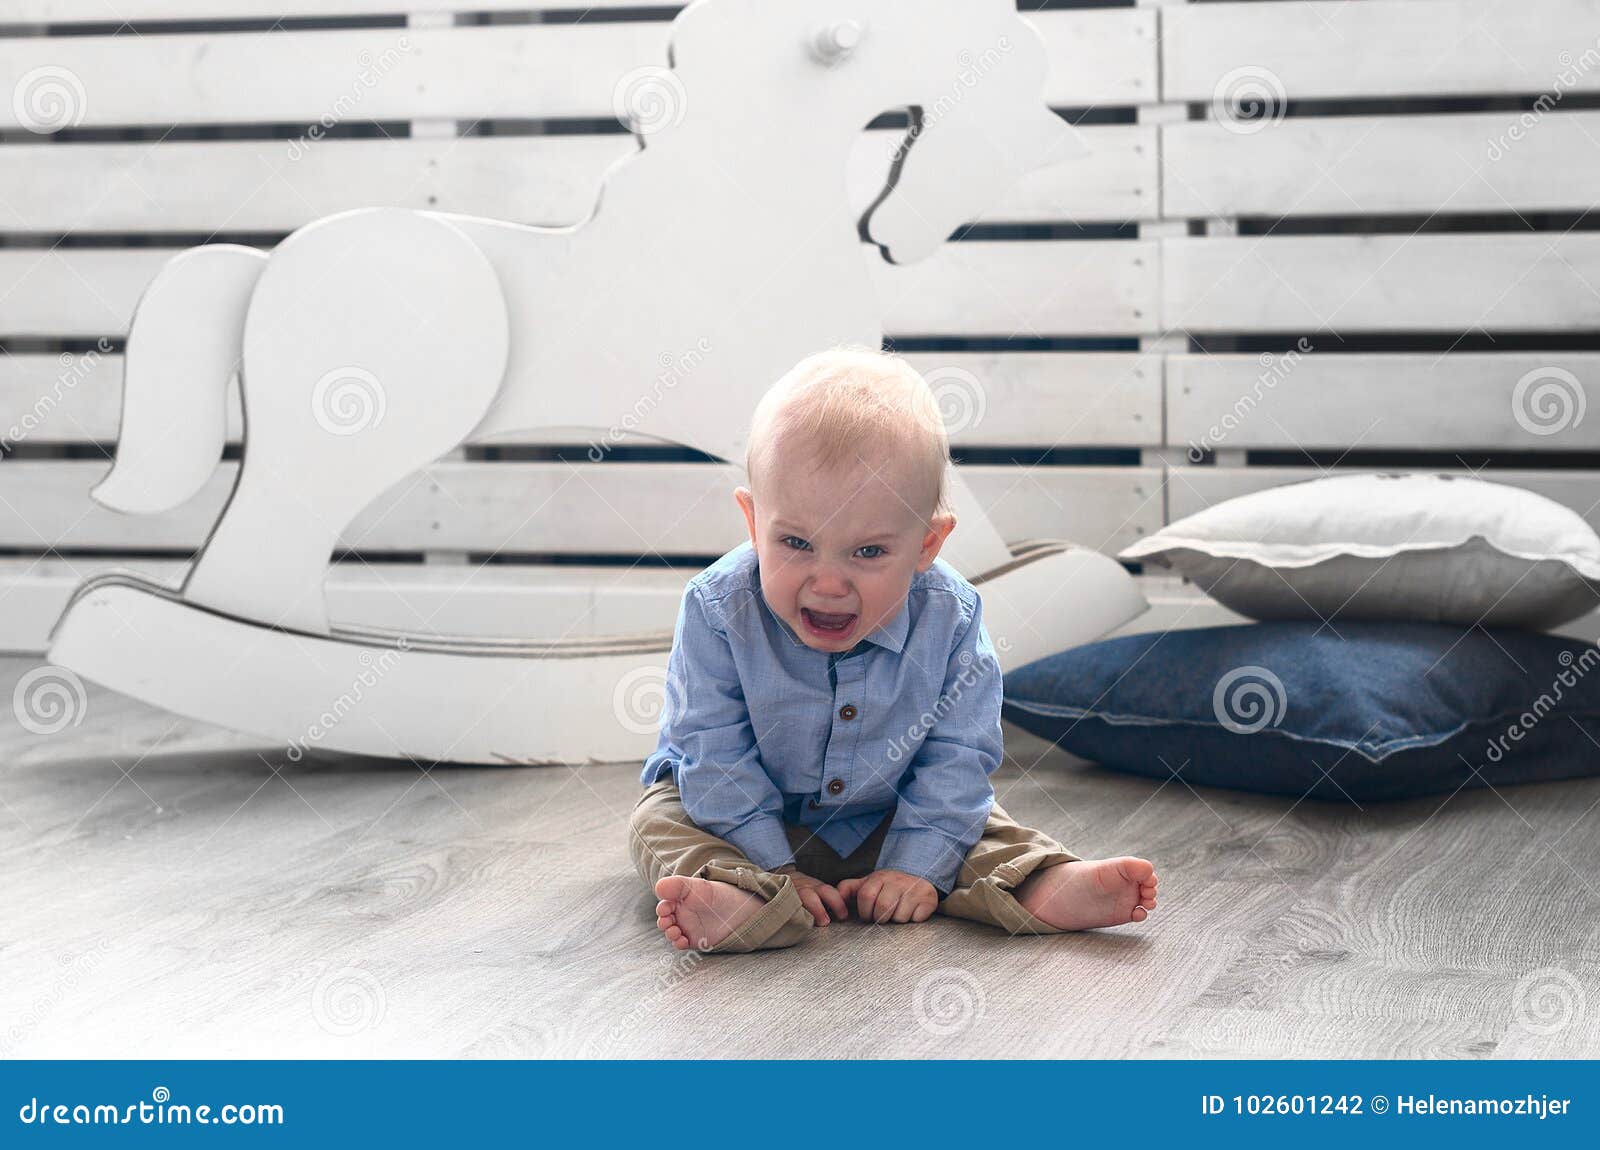 Crybaby Boy Sittin On The Floor. Baby Crying And Screaming. Stock Photo Image of hair, mood